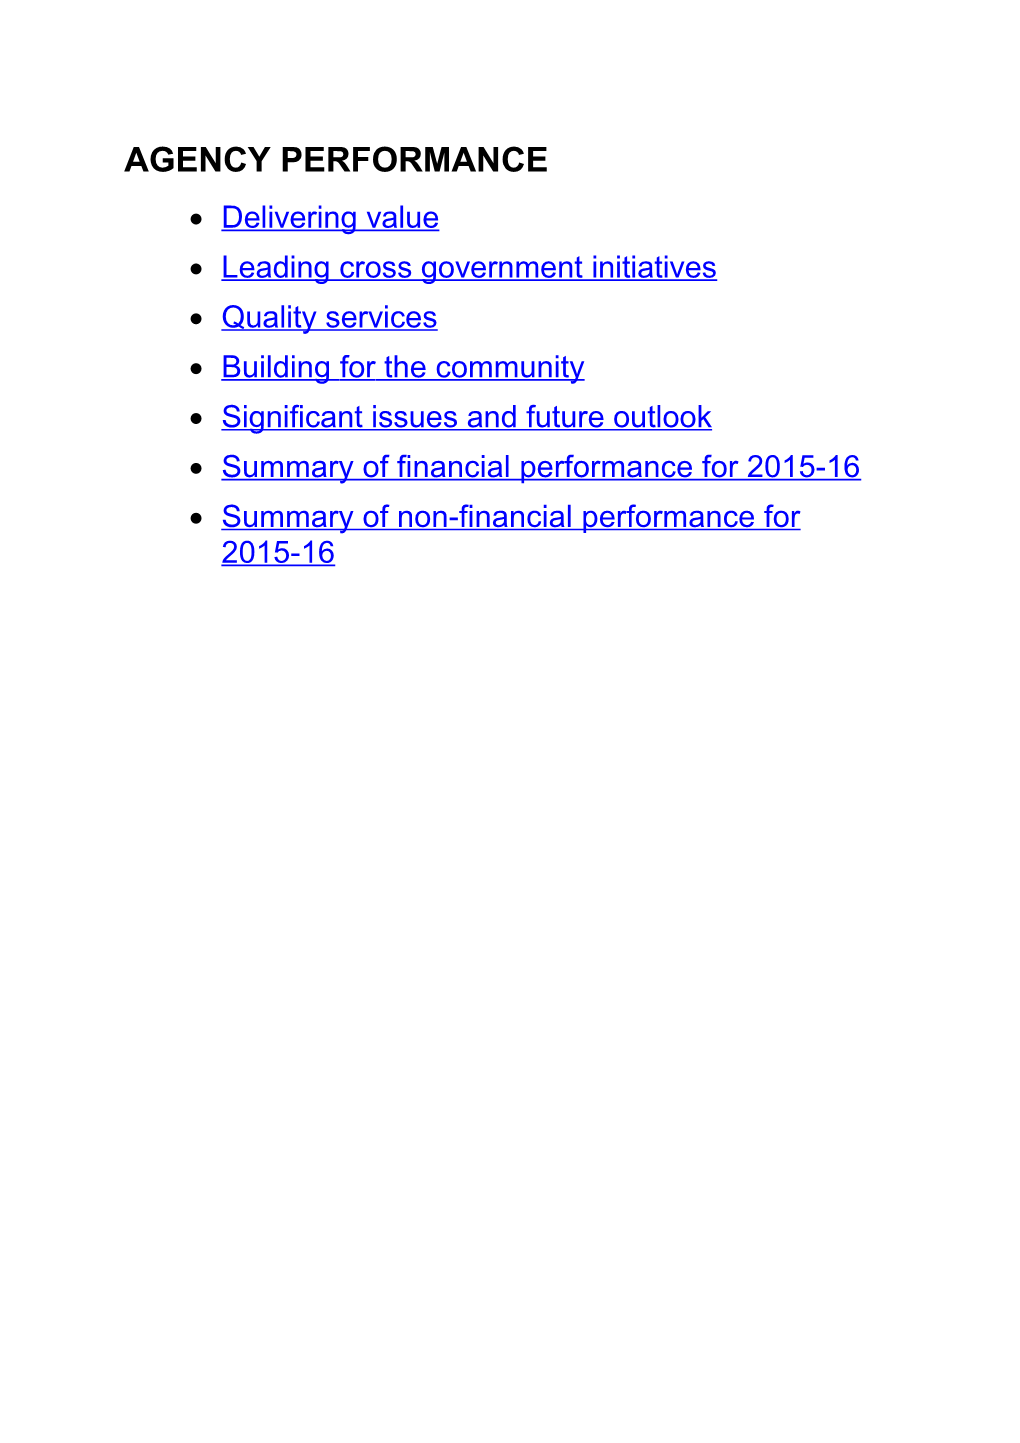 Department of Finance Annual Report 2014-15